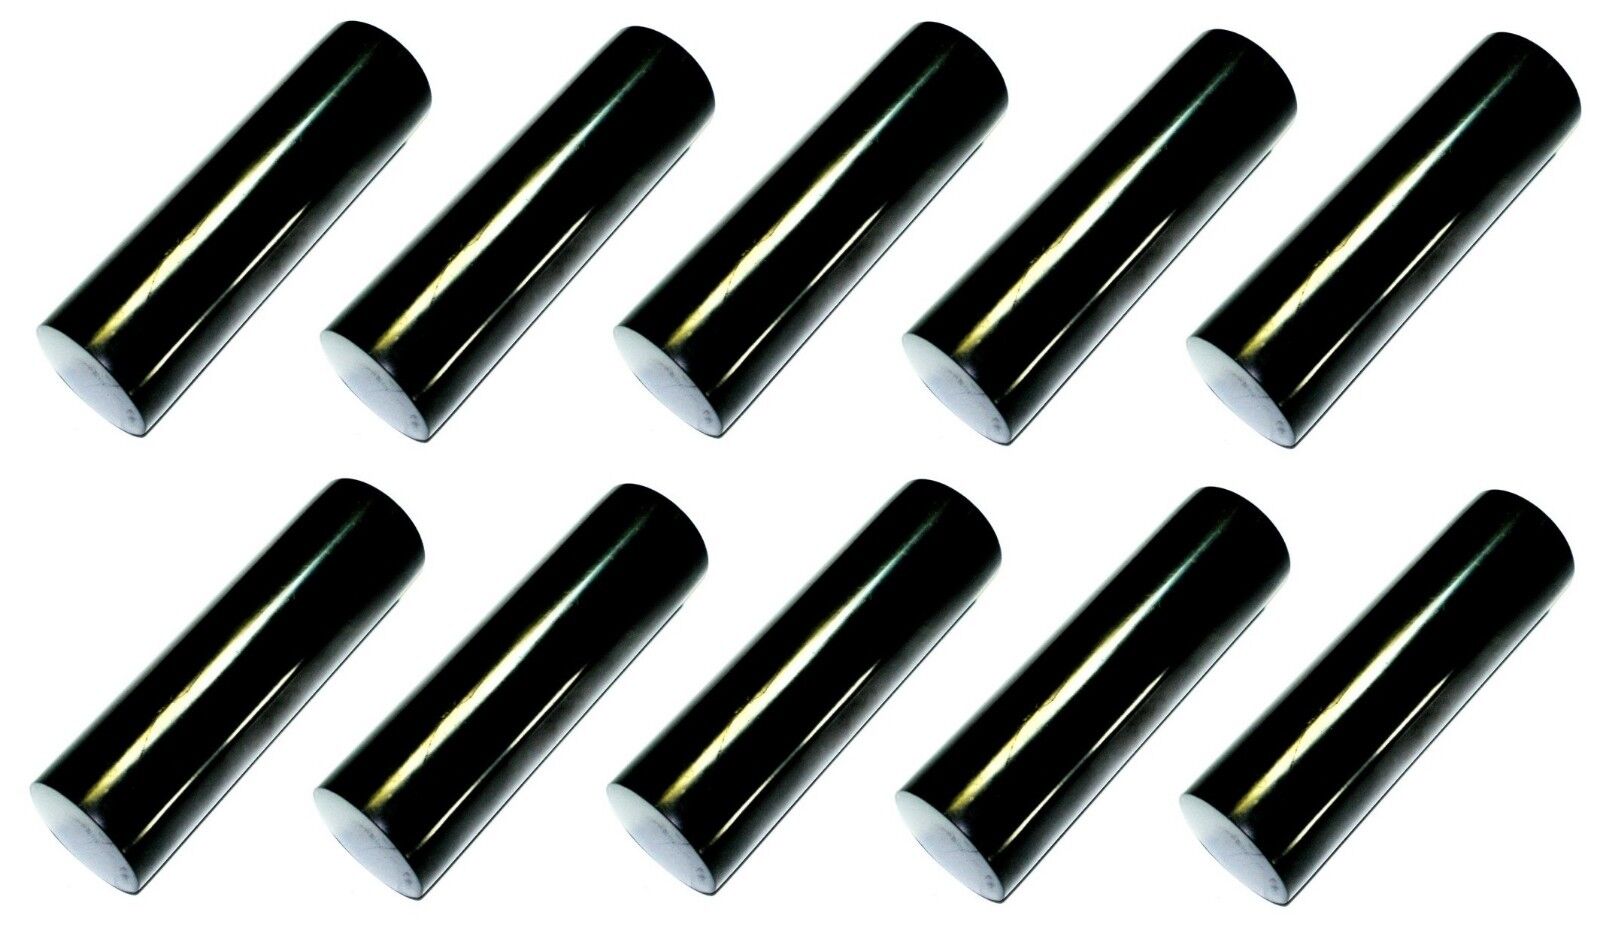 10 x Shungite Cylinders Harmonizers POLISHED set of 10 rods L 100 mm D 30 mm